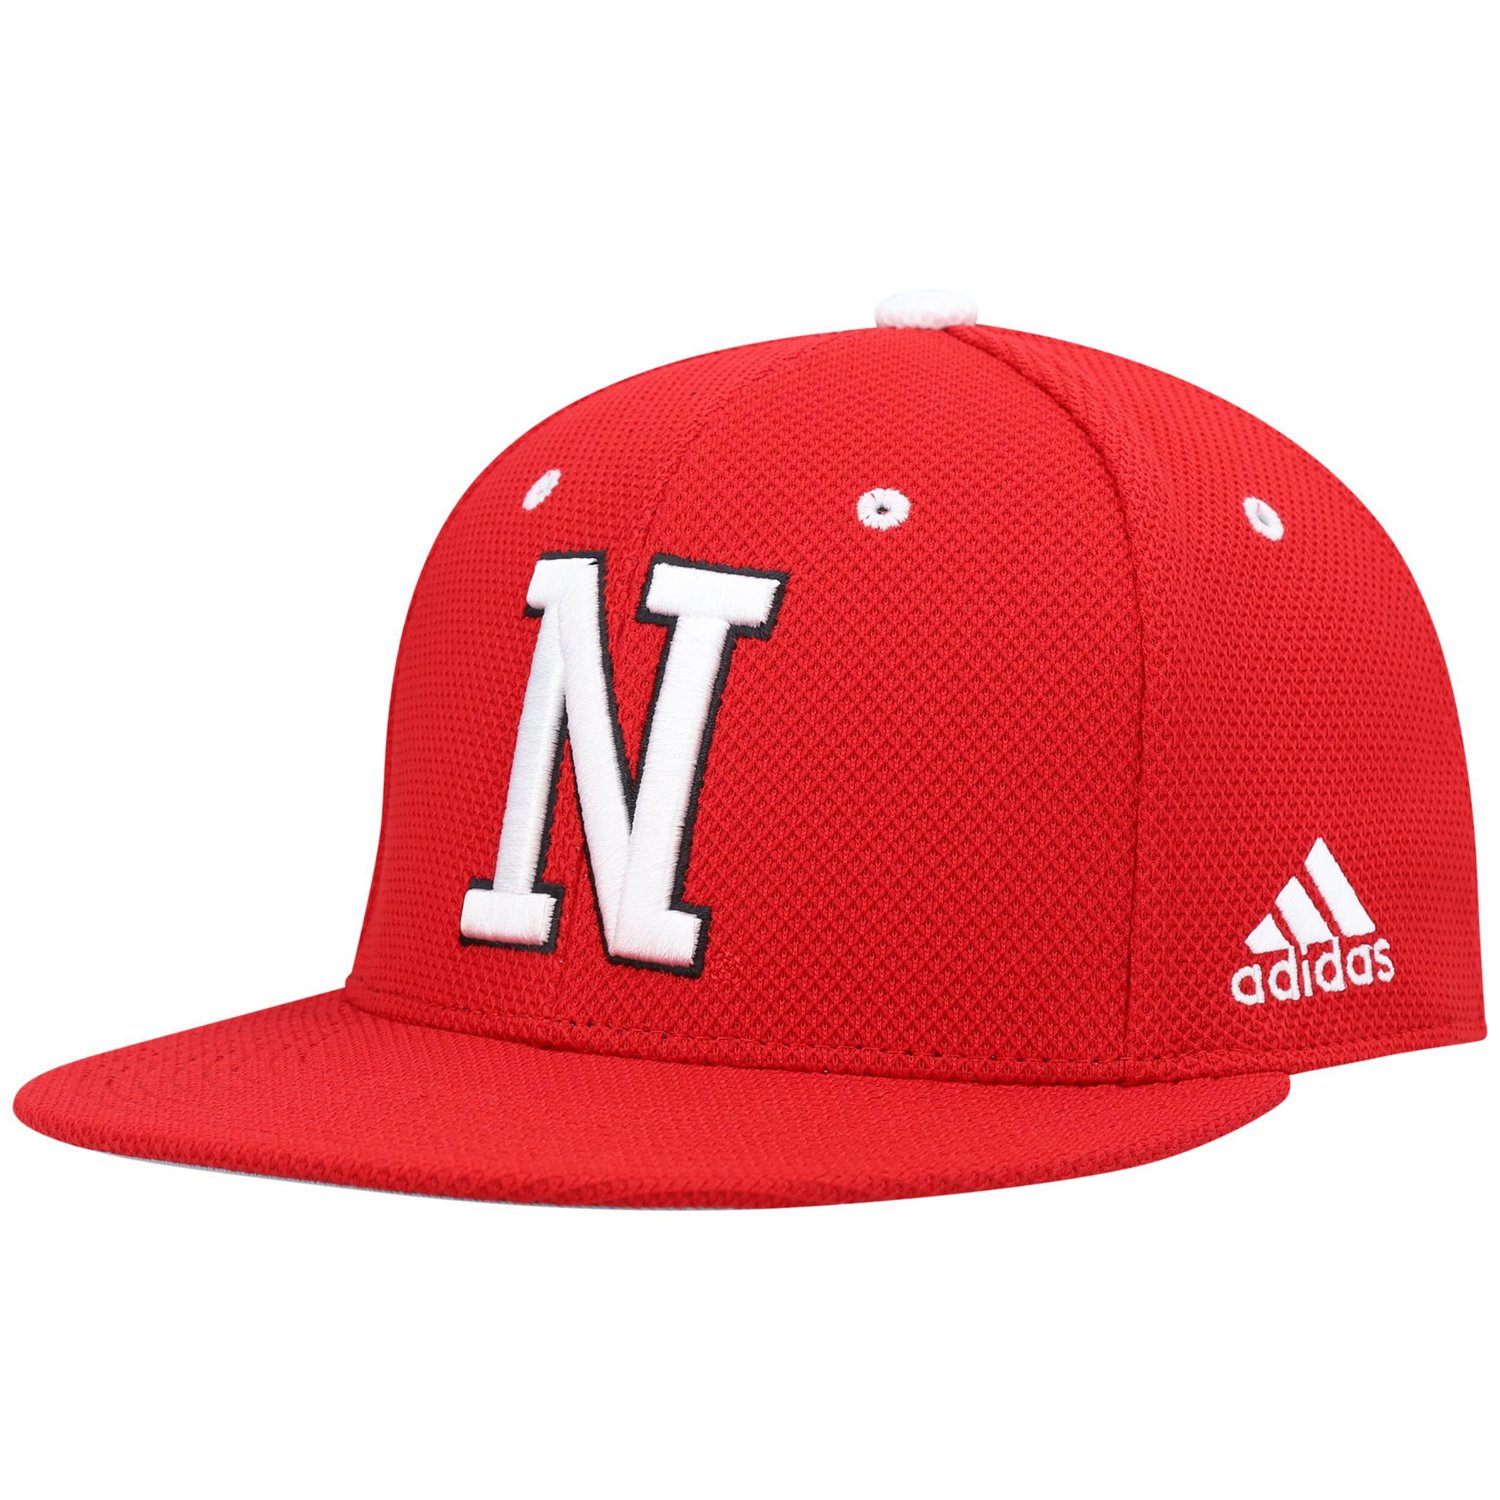 adidas Nebraska Huskers On-Field Baseball Fitted Hat                                                                             - view number 1 selected